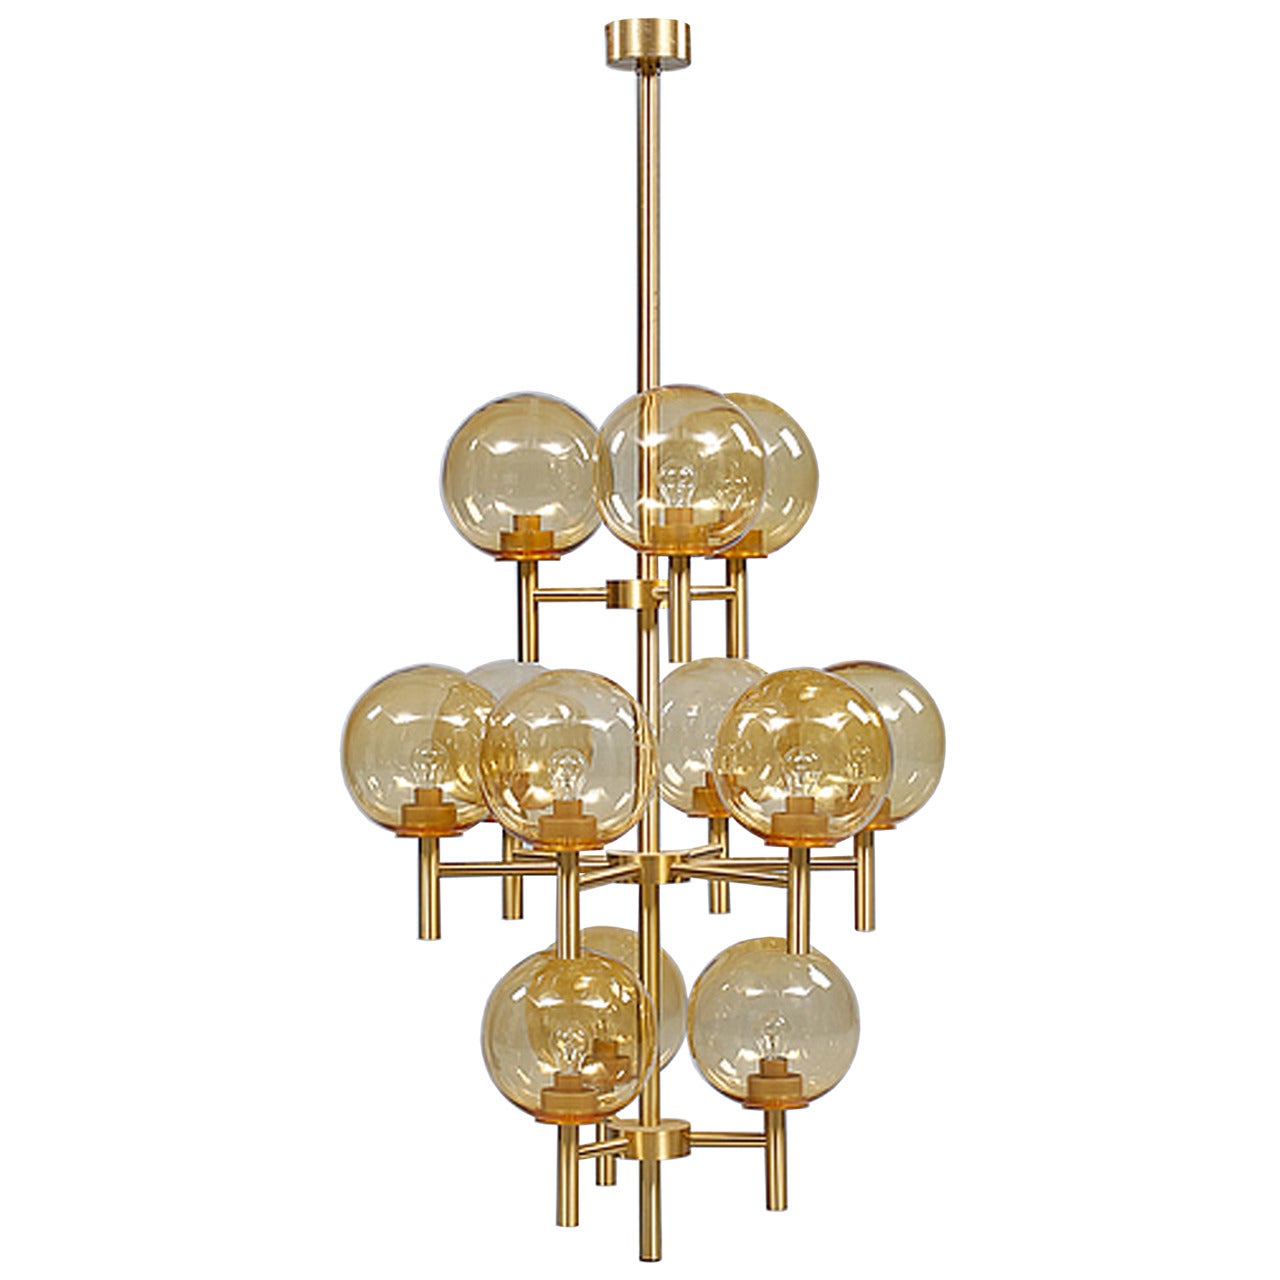 Brass and Glass Chandelier by Uno & Osten Kristiansson For Sale